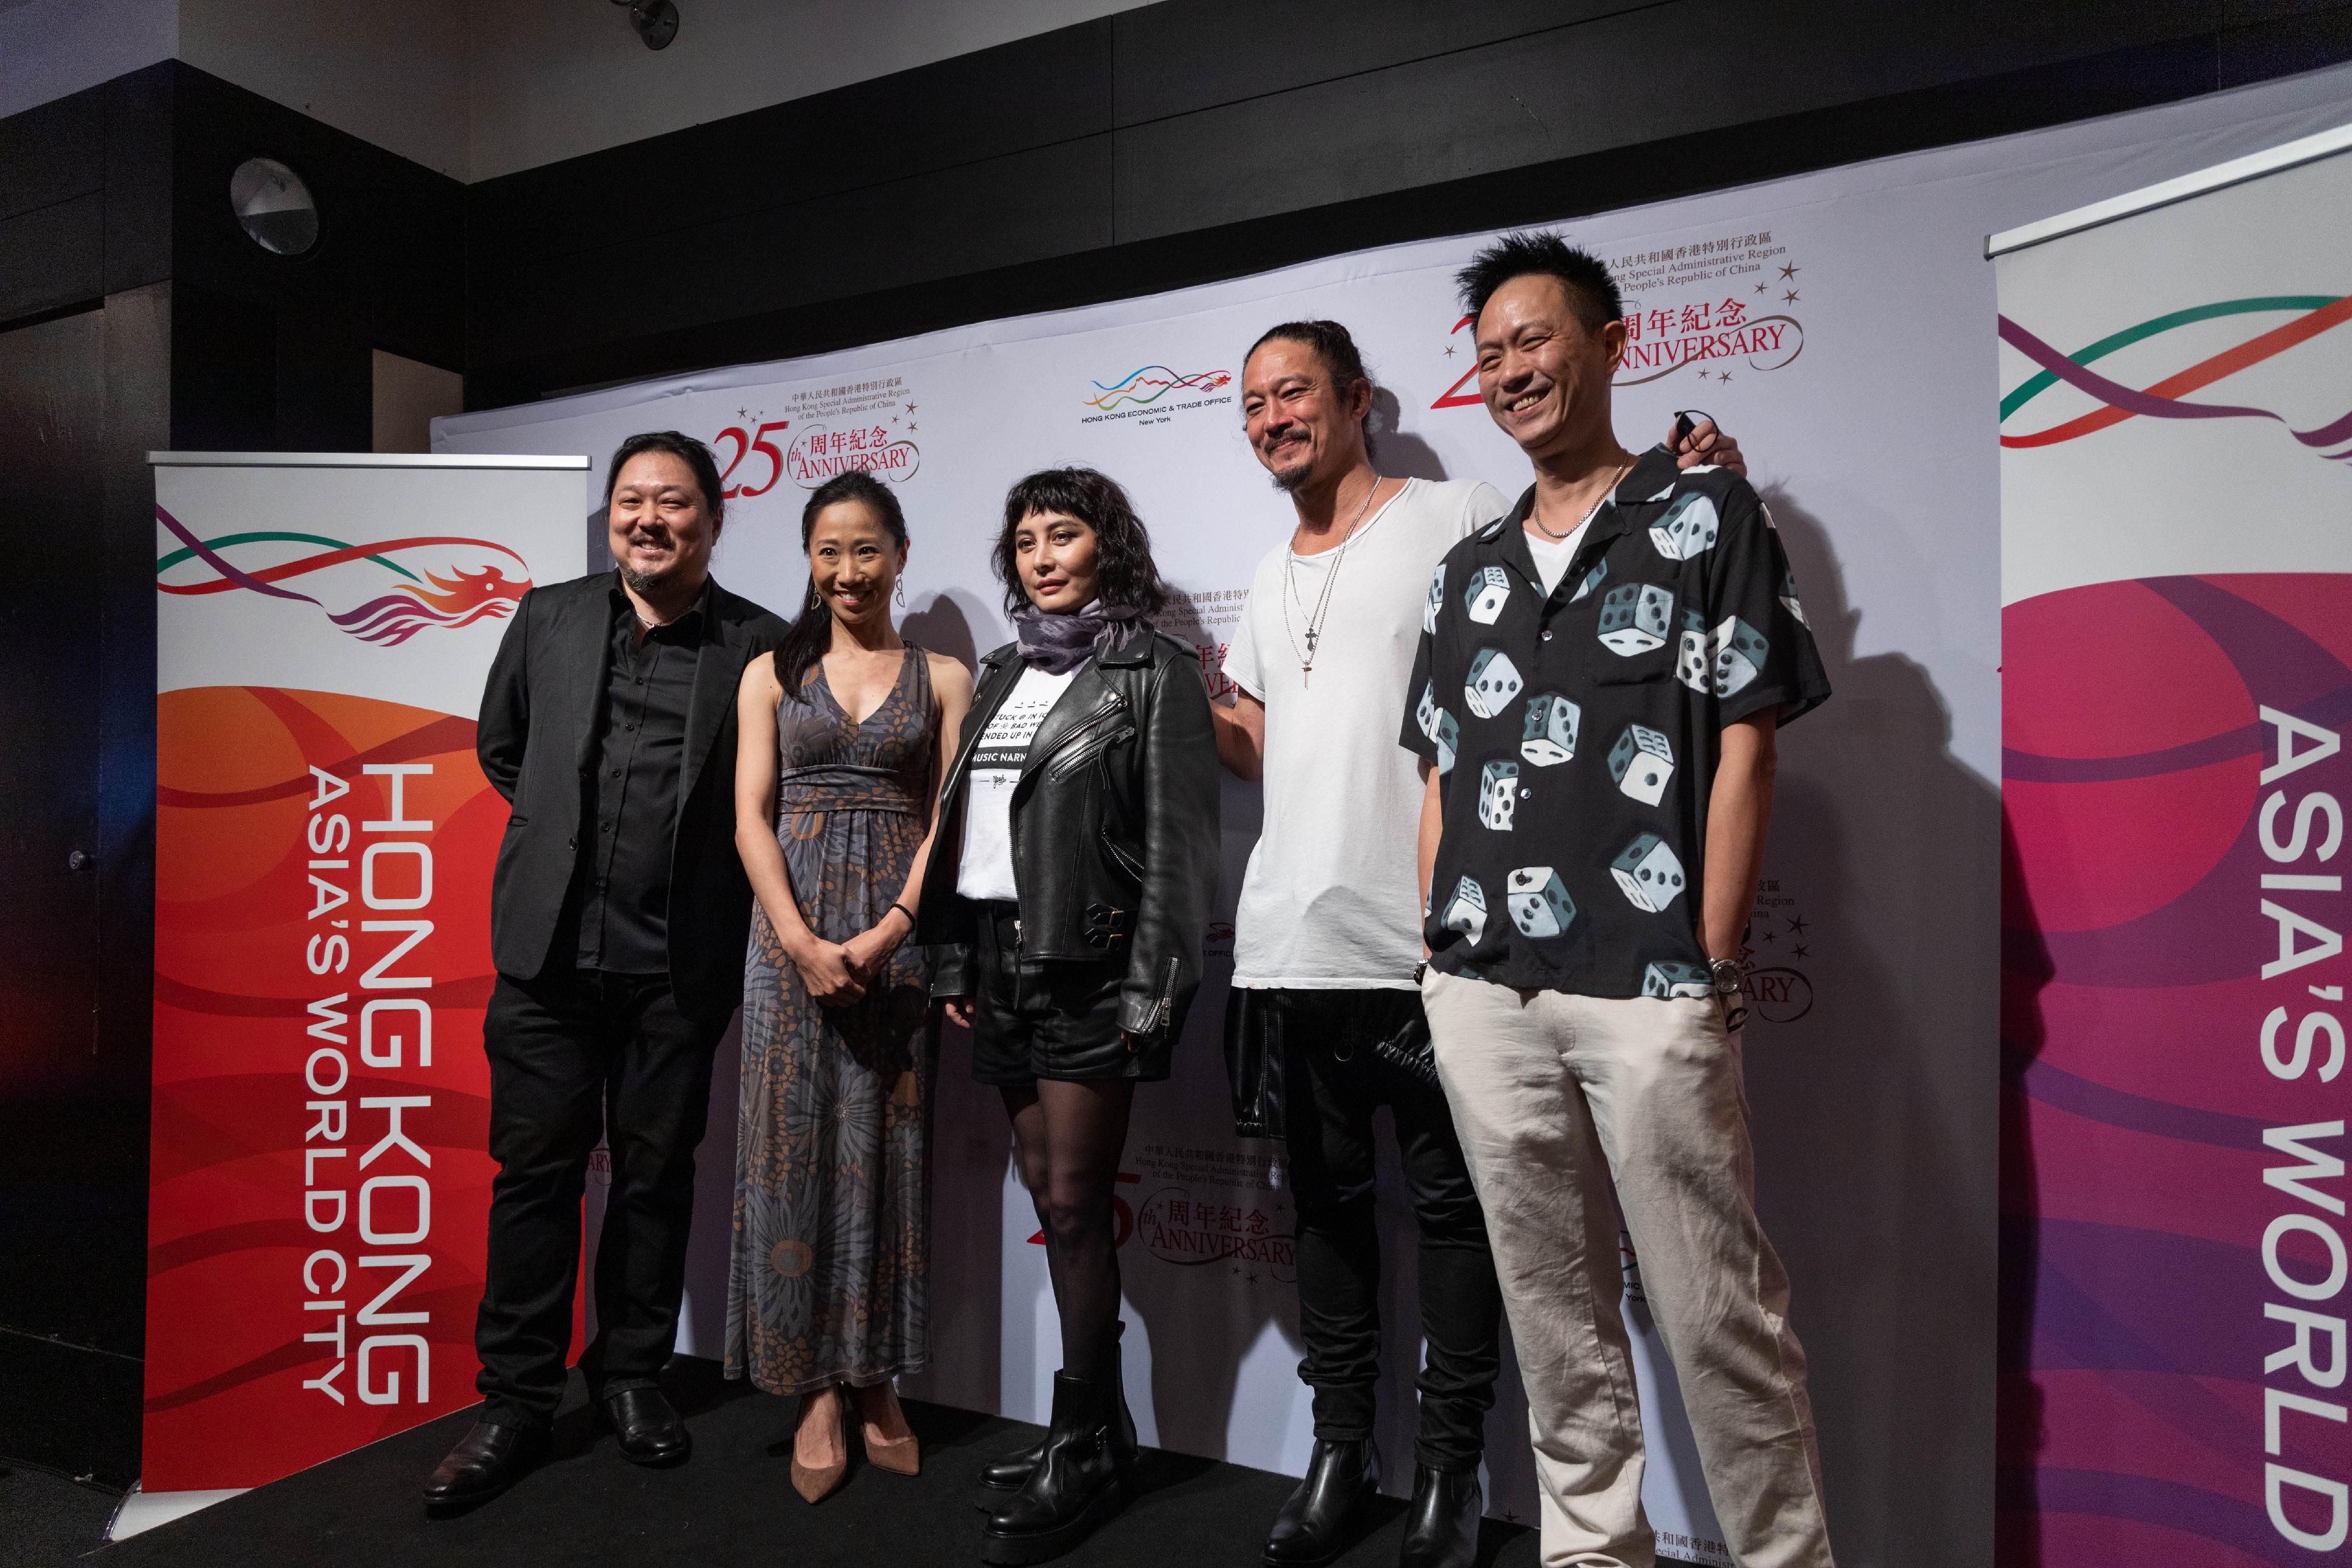 The Hong Kong Economic and Trade Office, New York (HKETONY), organised a welcome reception this evening (July 18, New York time) in honour of Hong Kong singer-actor Josie Ho and her creative team at the New York Asian Film Festival (NYAFF). Photo shows (from left) the Executive Director of the NYAFF, Mr Samuel Jamier; HKETONY Director, Ms Candy Nip; Josie Ho; film producer Conroy Chan; and film director Kim Chan.